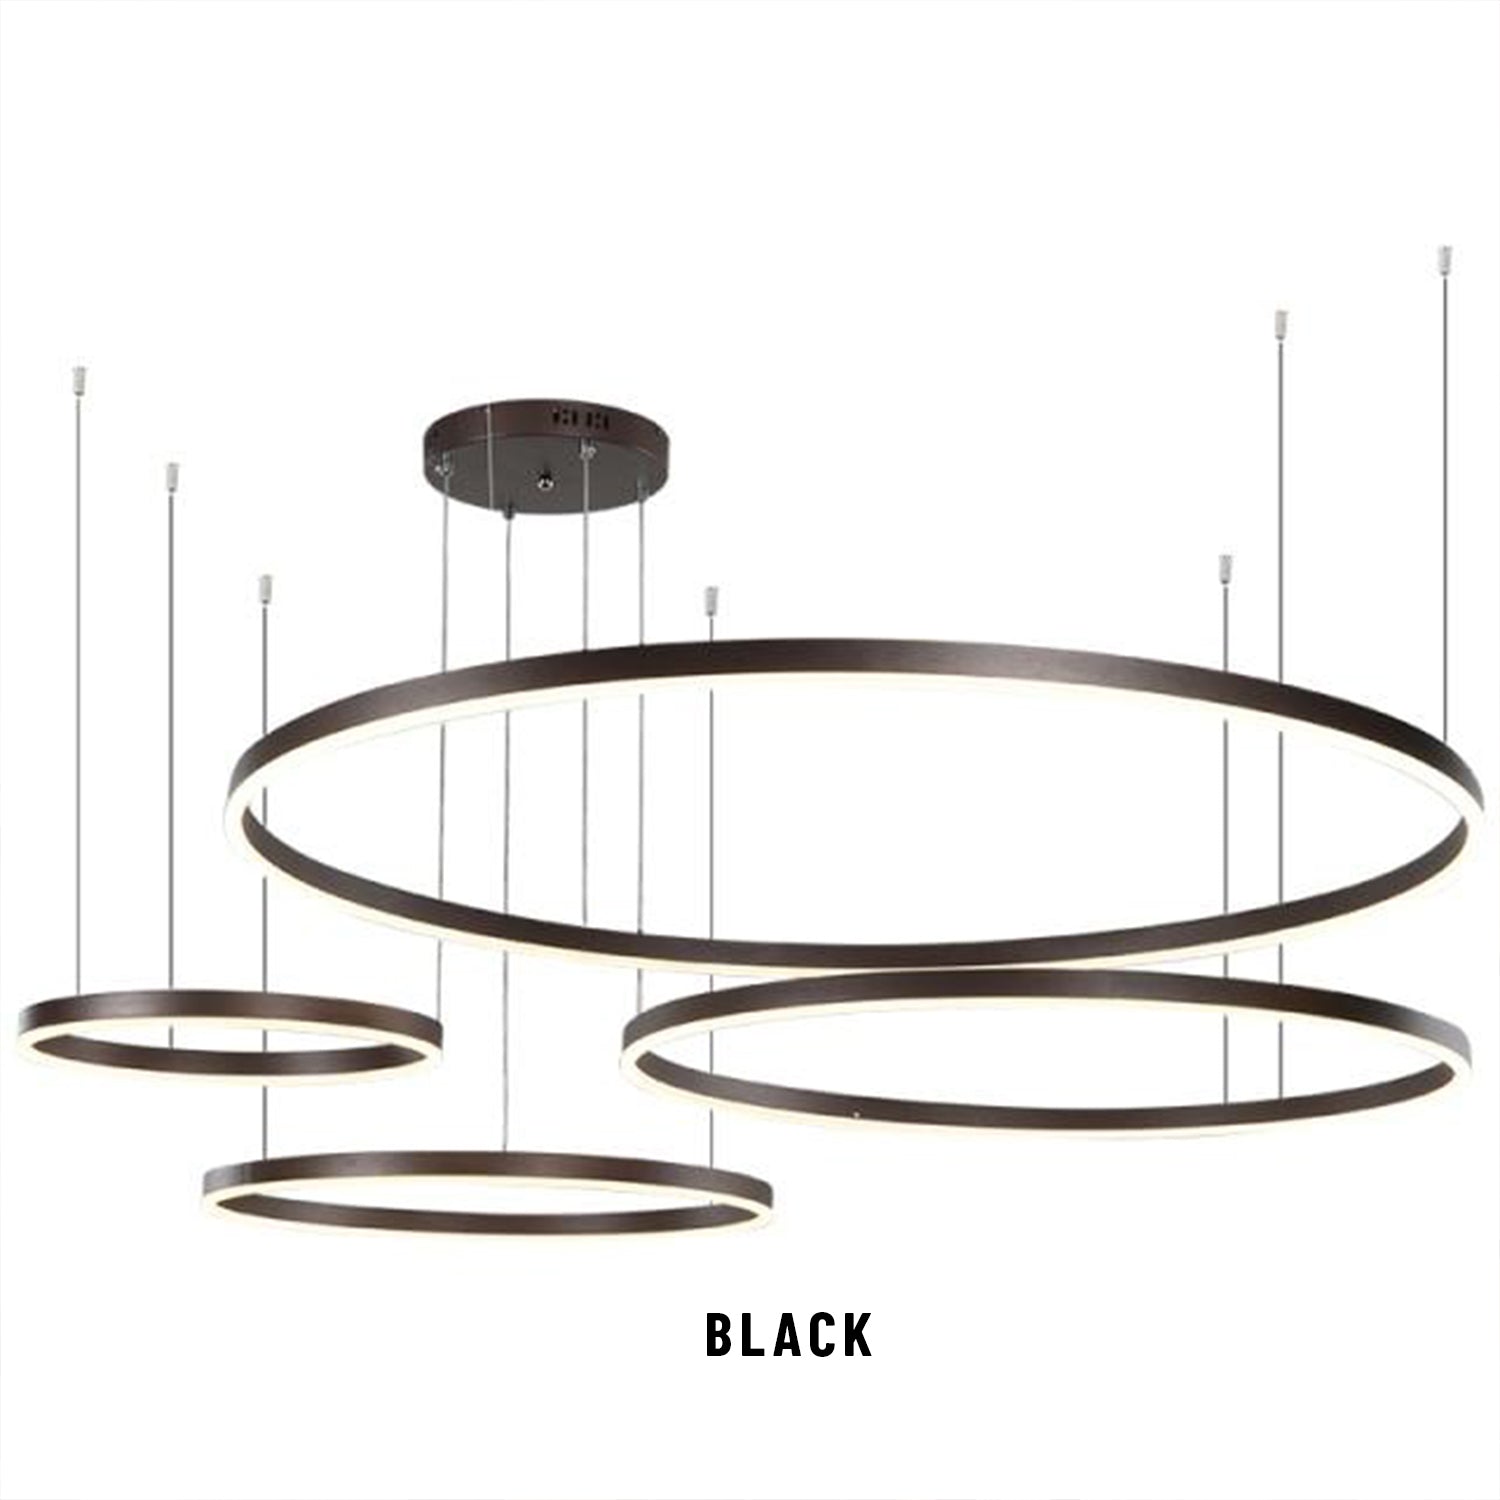 Circle Rings Acrylic | Aluminum Chandeliers - Black / 4R 30 40 60 80cm / Remote dimming - Level Decor